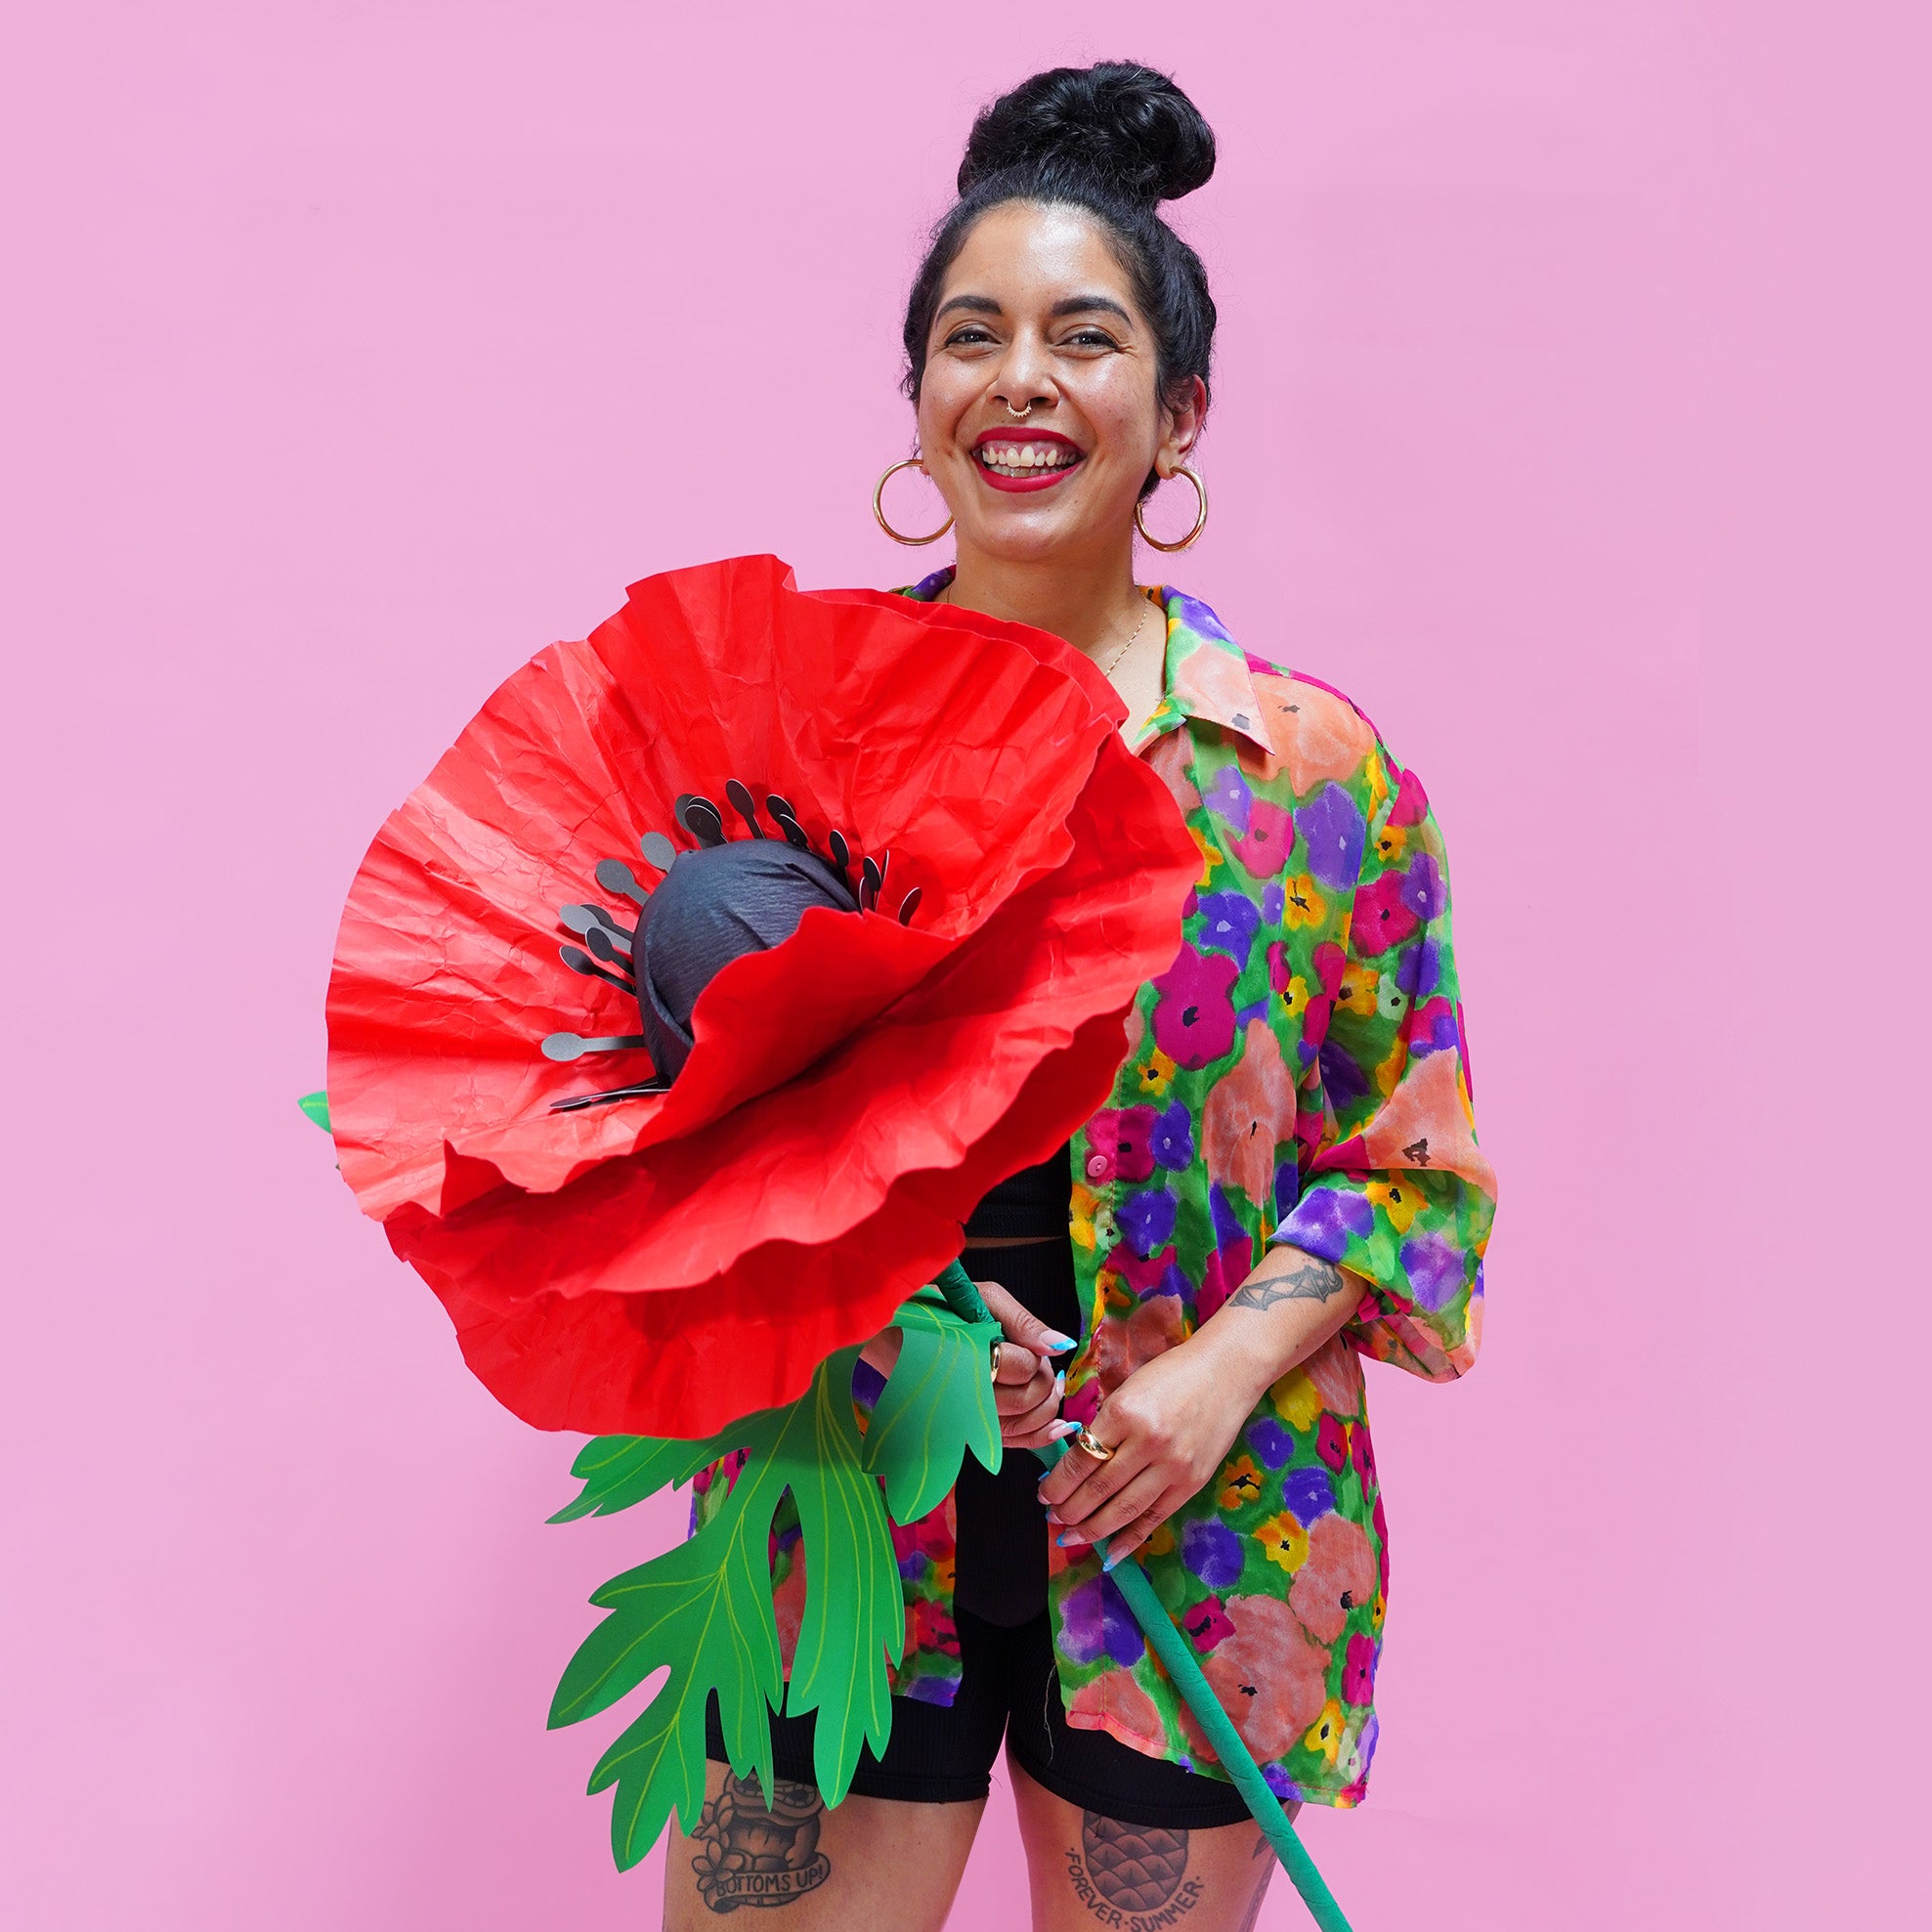 Kitiya, a woman with brown skin and black hair, holds a giant paper poppy prop in front of a pink background. She wears a colourful floral shirt and black shorts.